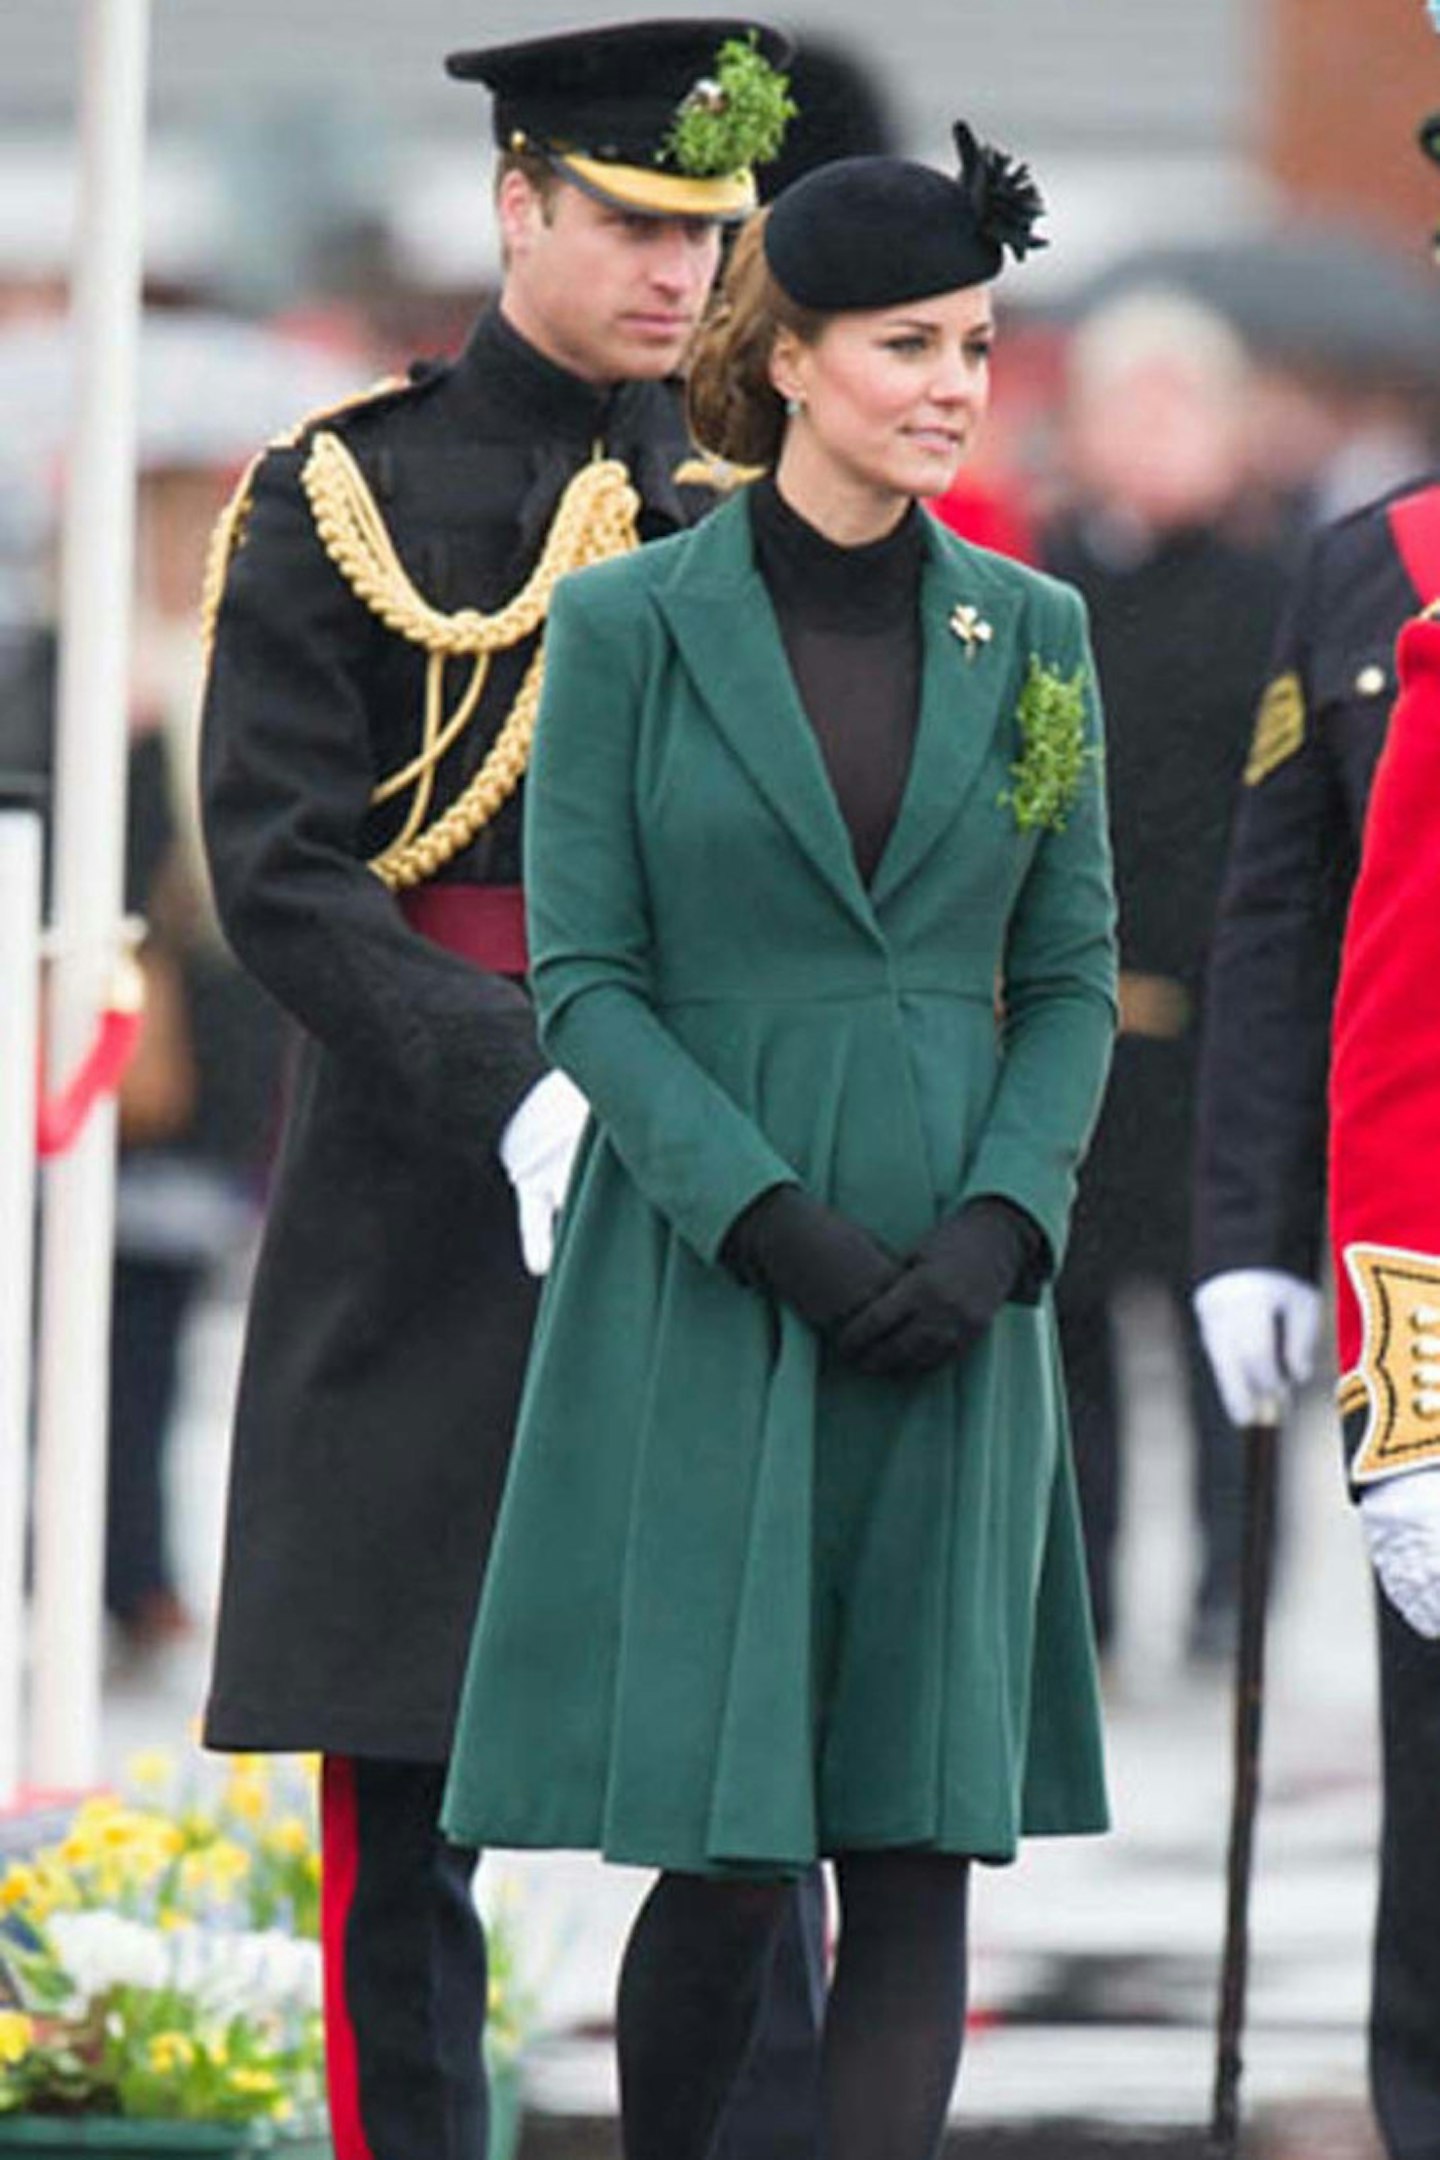 Kate Middleton in Emilia Wickstead at St Patricku2019s Day Parade, 17 March 2013